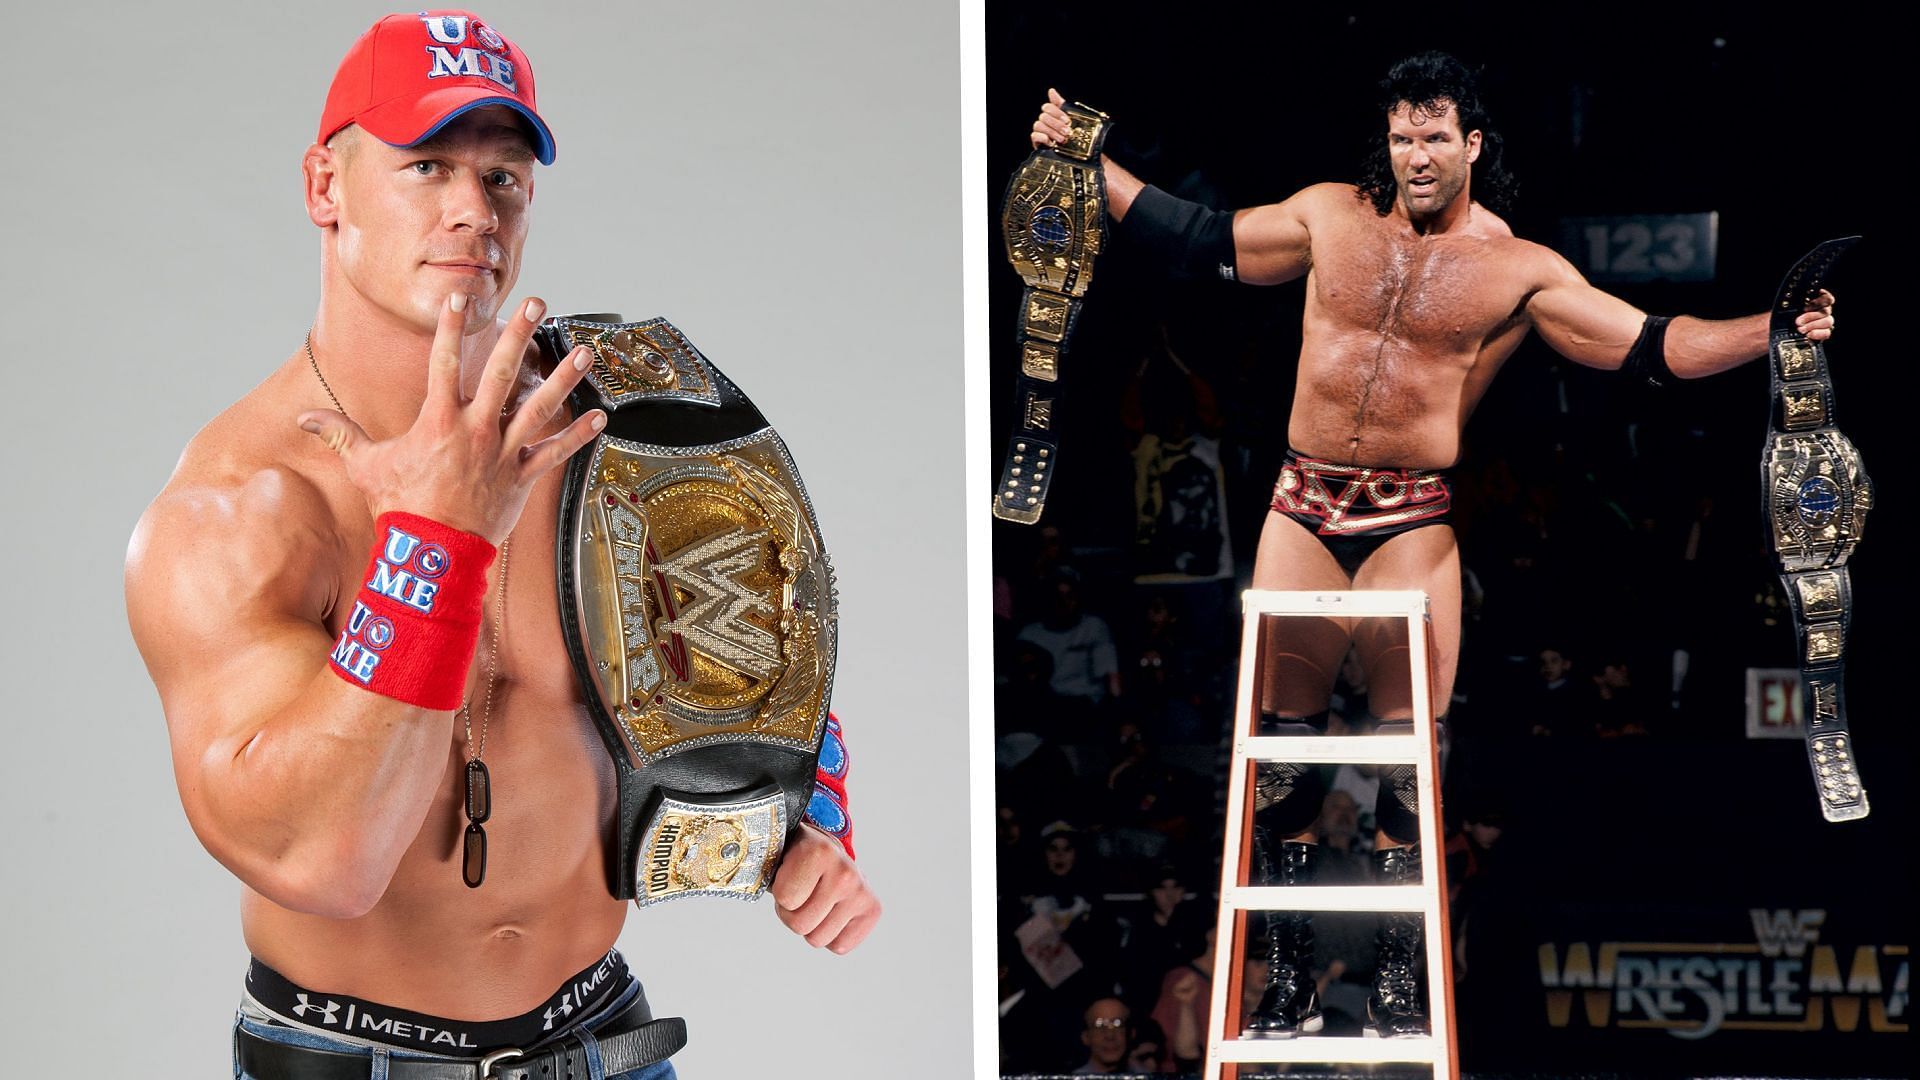 There have been times when the status of a championship in WWE has been in question